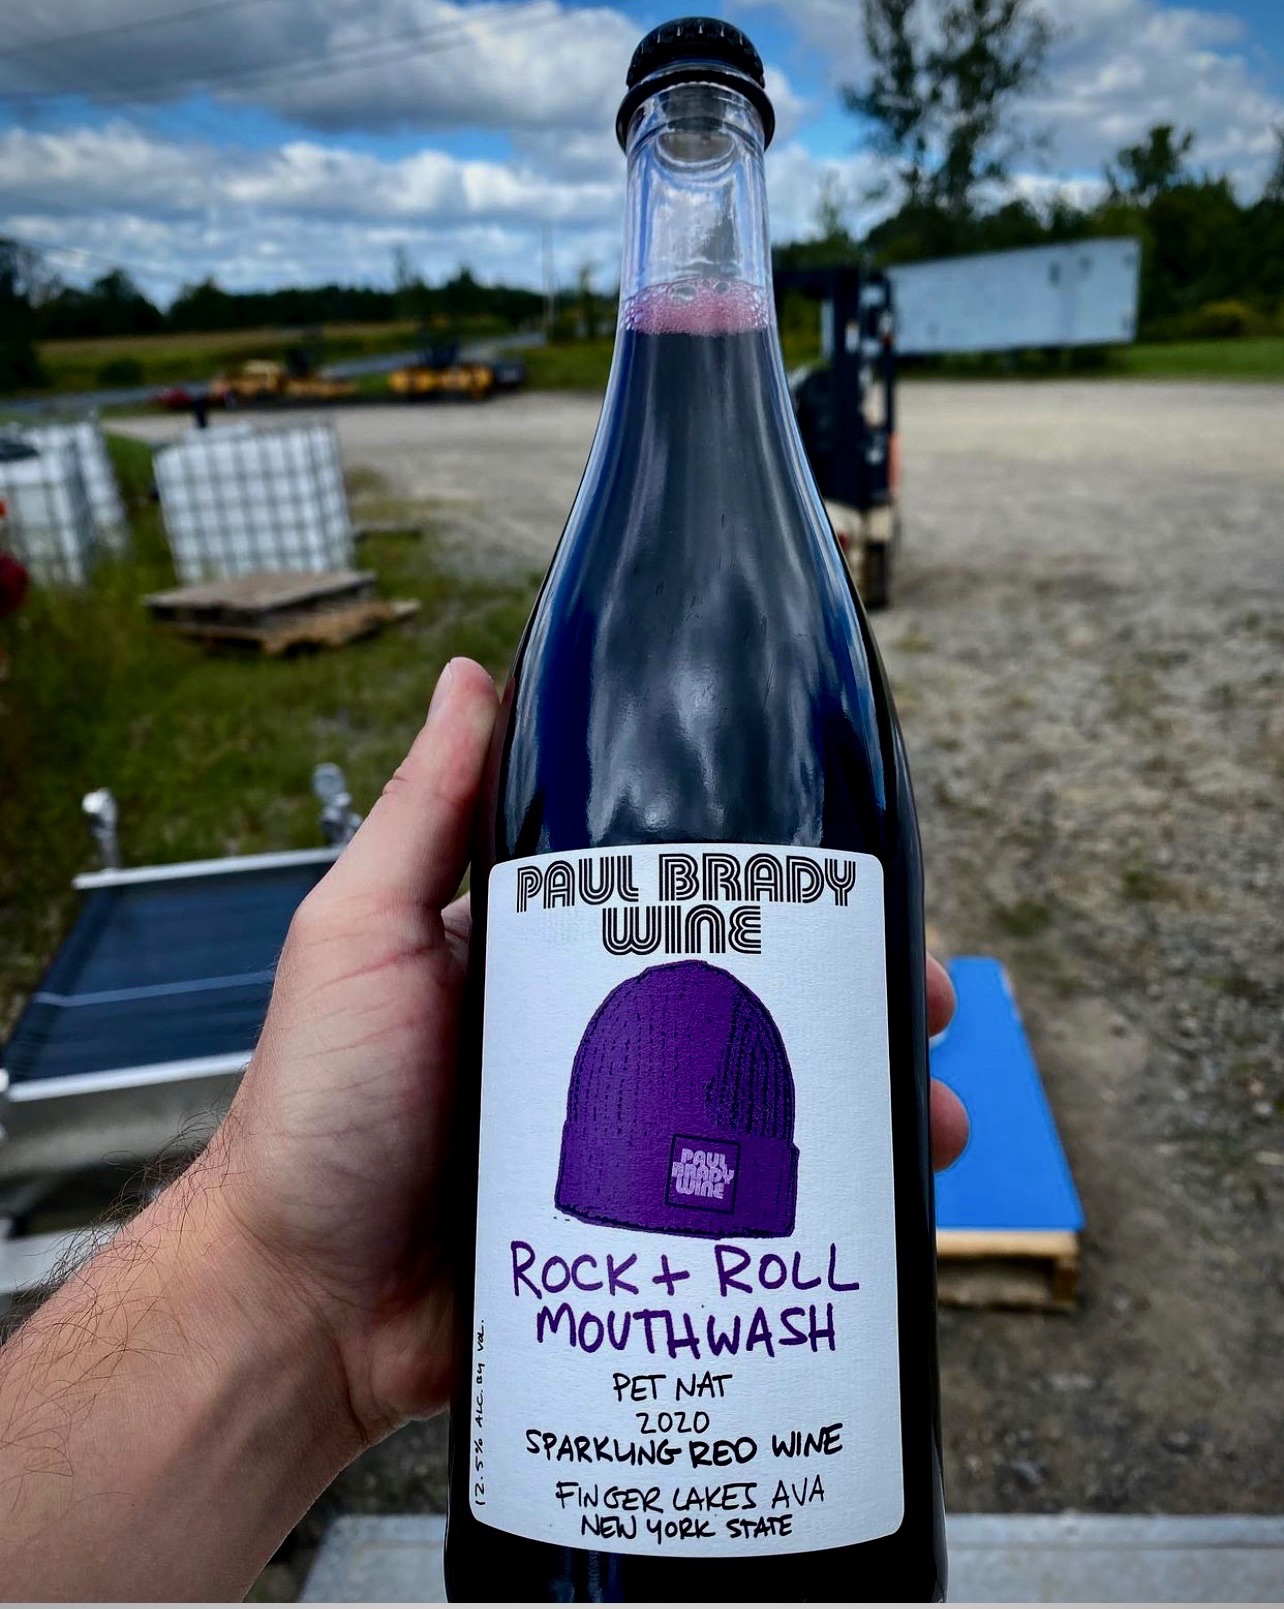 In addition to an array of New York state craft beverages, the tasting room and shop at Paul Brady Wine in Beacon, NY will feature its own custom crafted wines; info at PaulBradyWine.com.